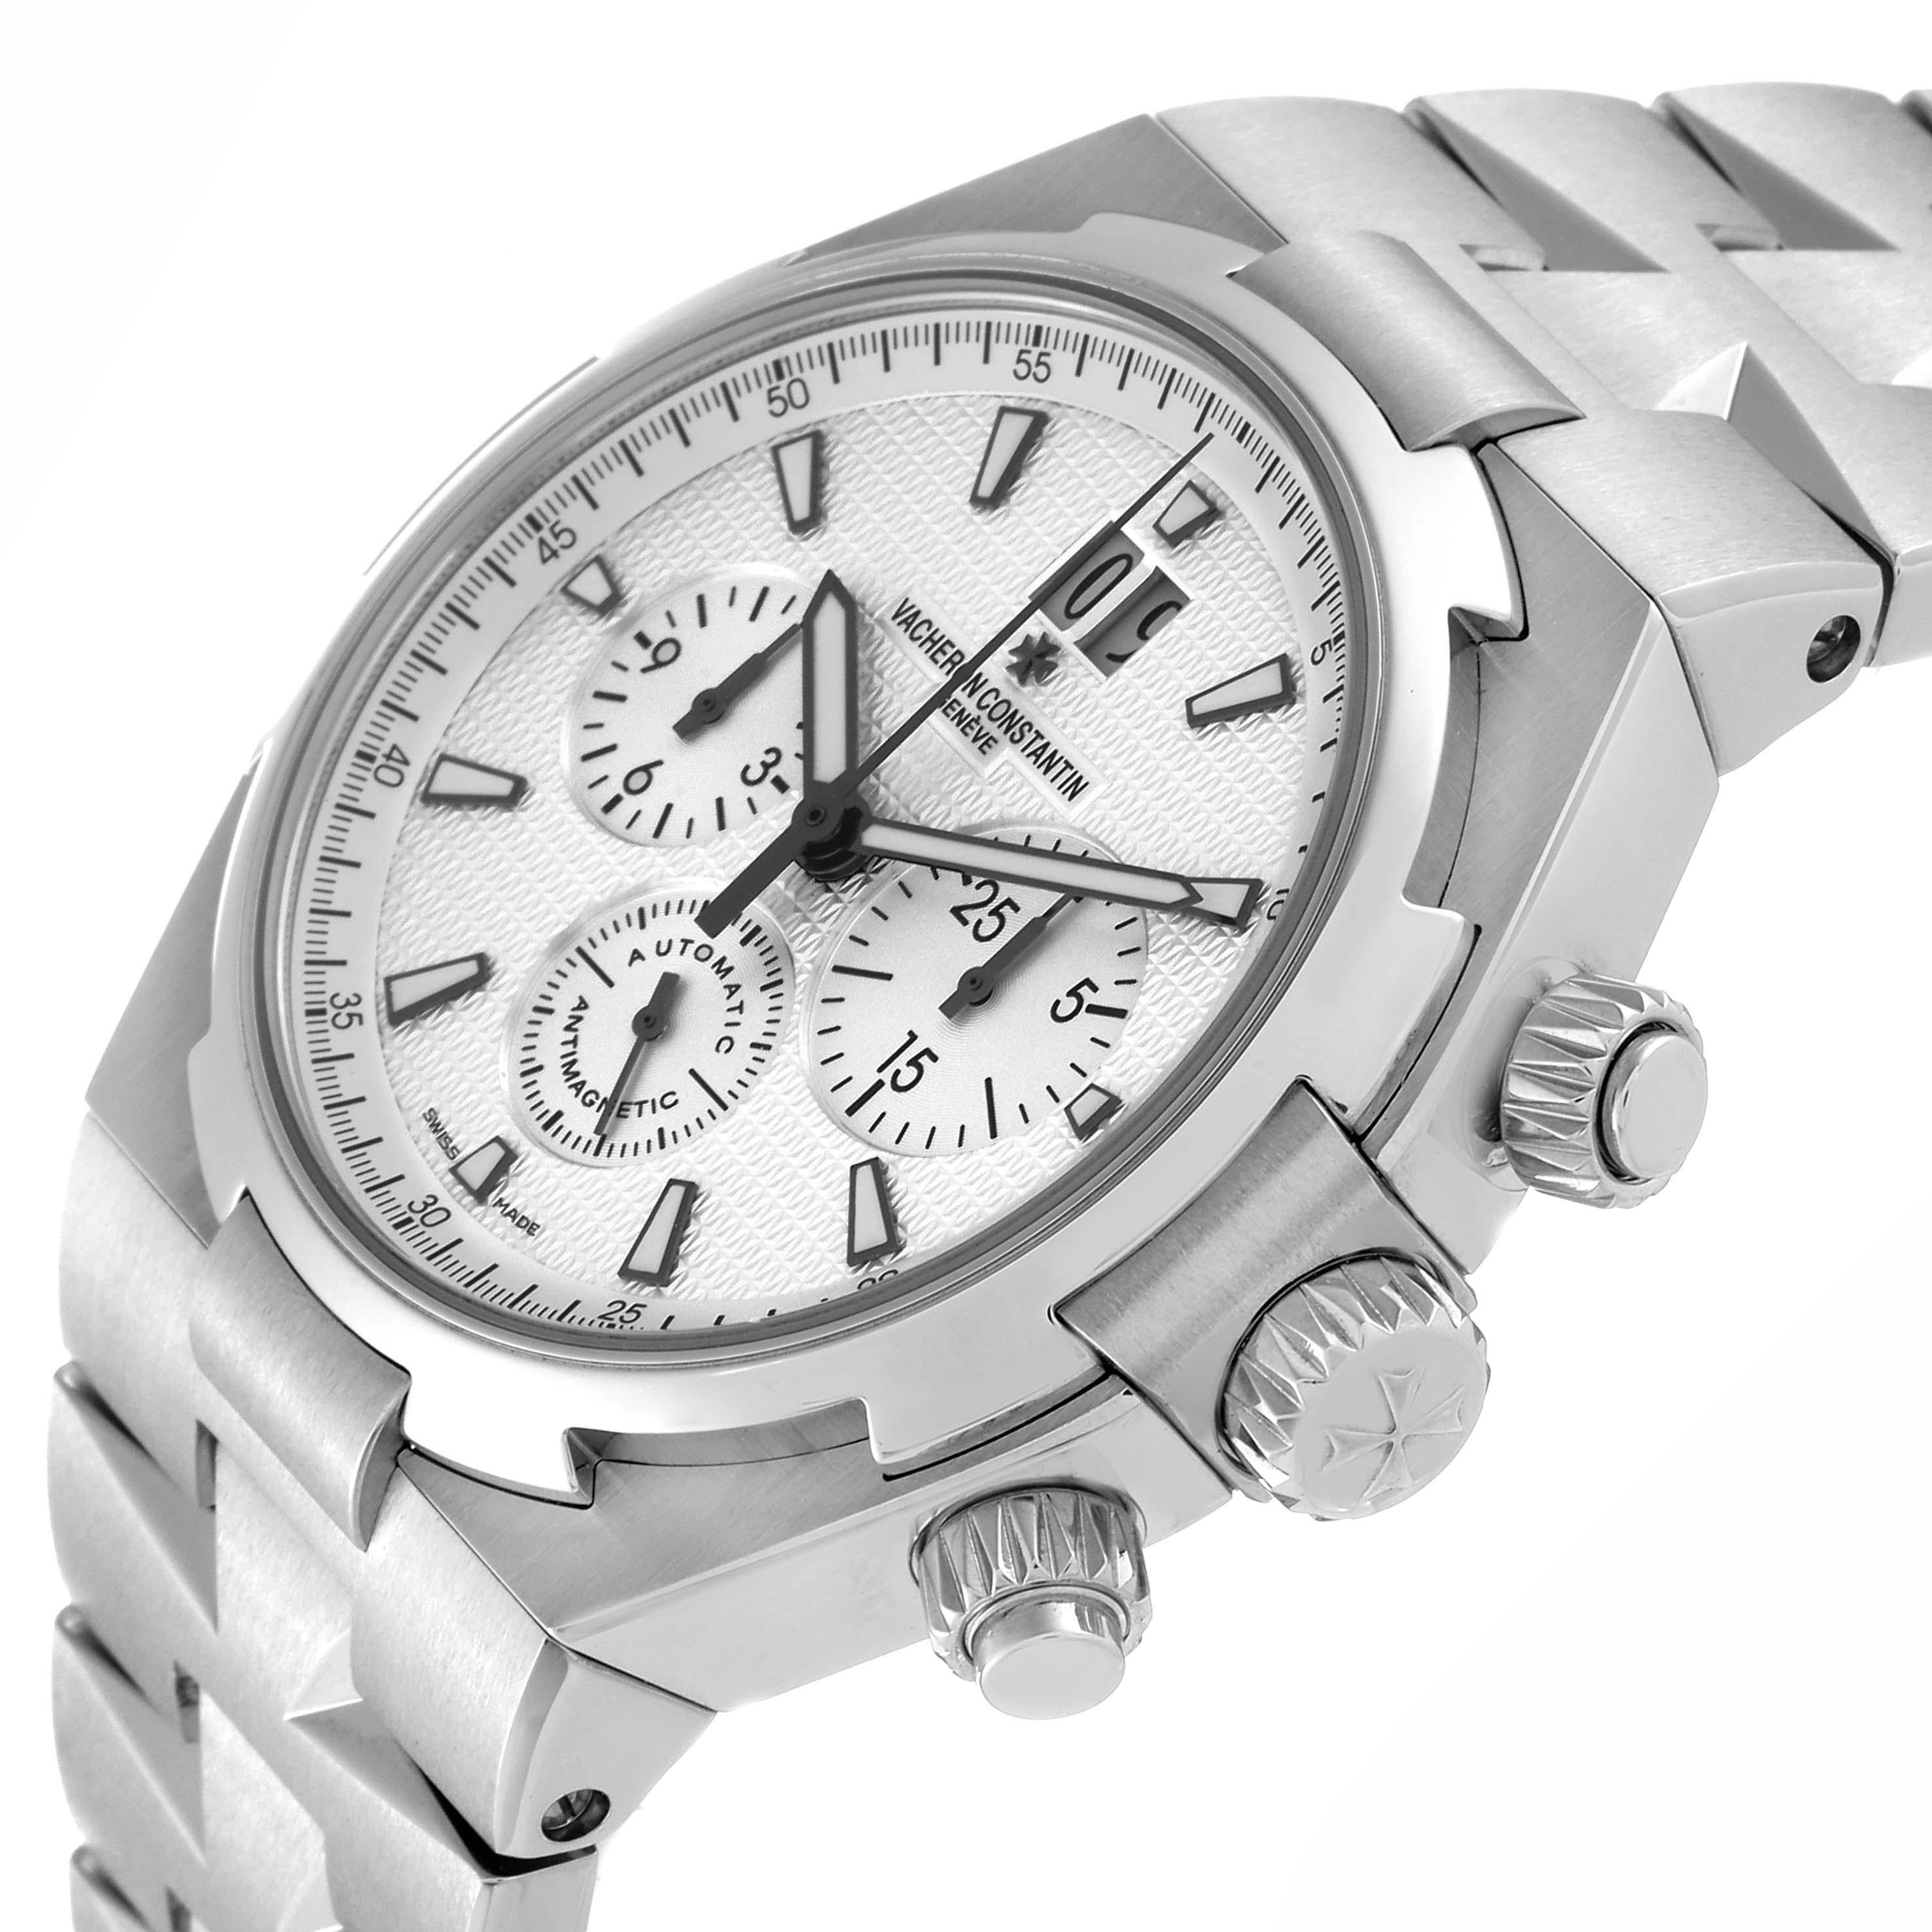 Vacheron Constantin Overseas Silver Dial Chronograph Mens Watch 49150 Papers. Automatic self-winding chronograph movement. Stainless steel case 42.5 mm in diameter. Screwed down crown and pushers. Vacheron Constantin logo on crown. Solid case back